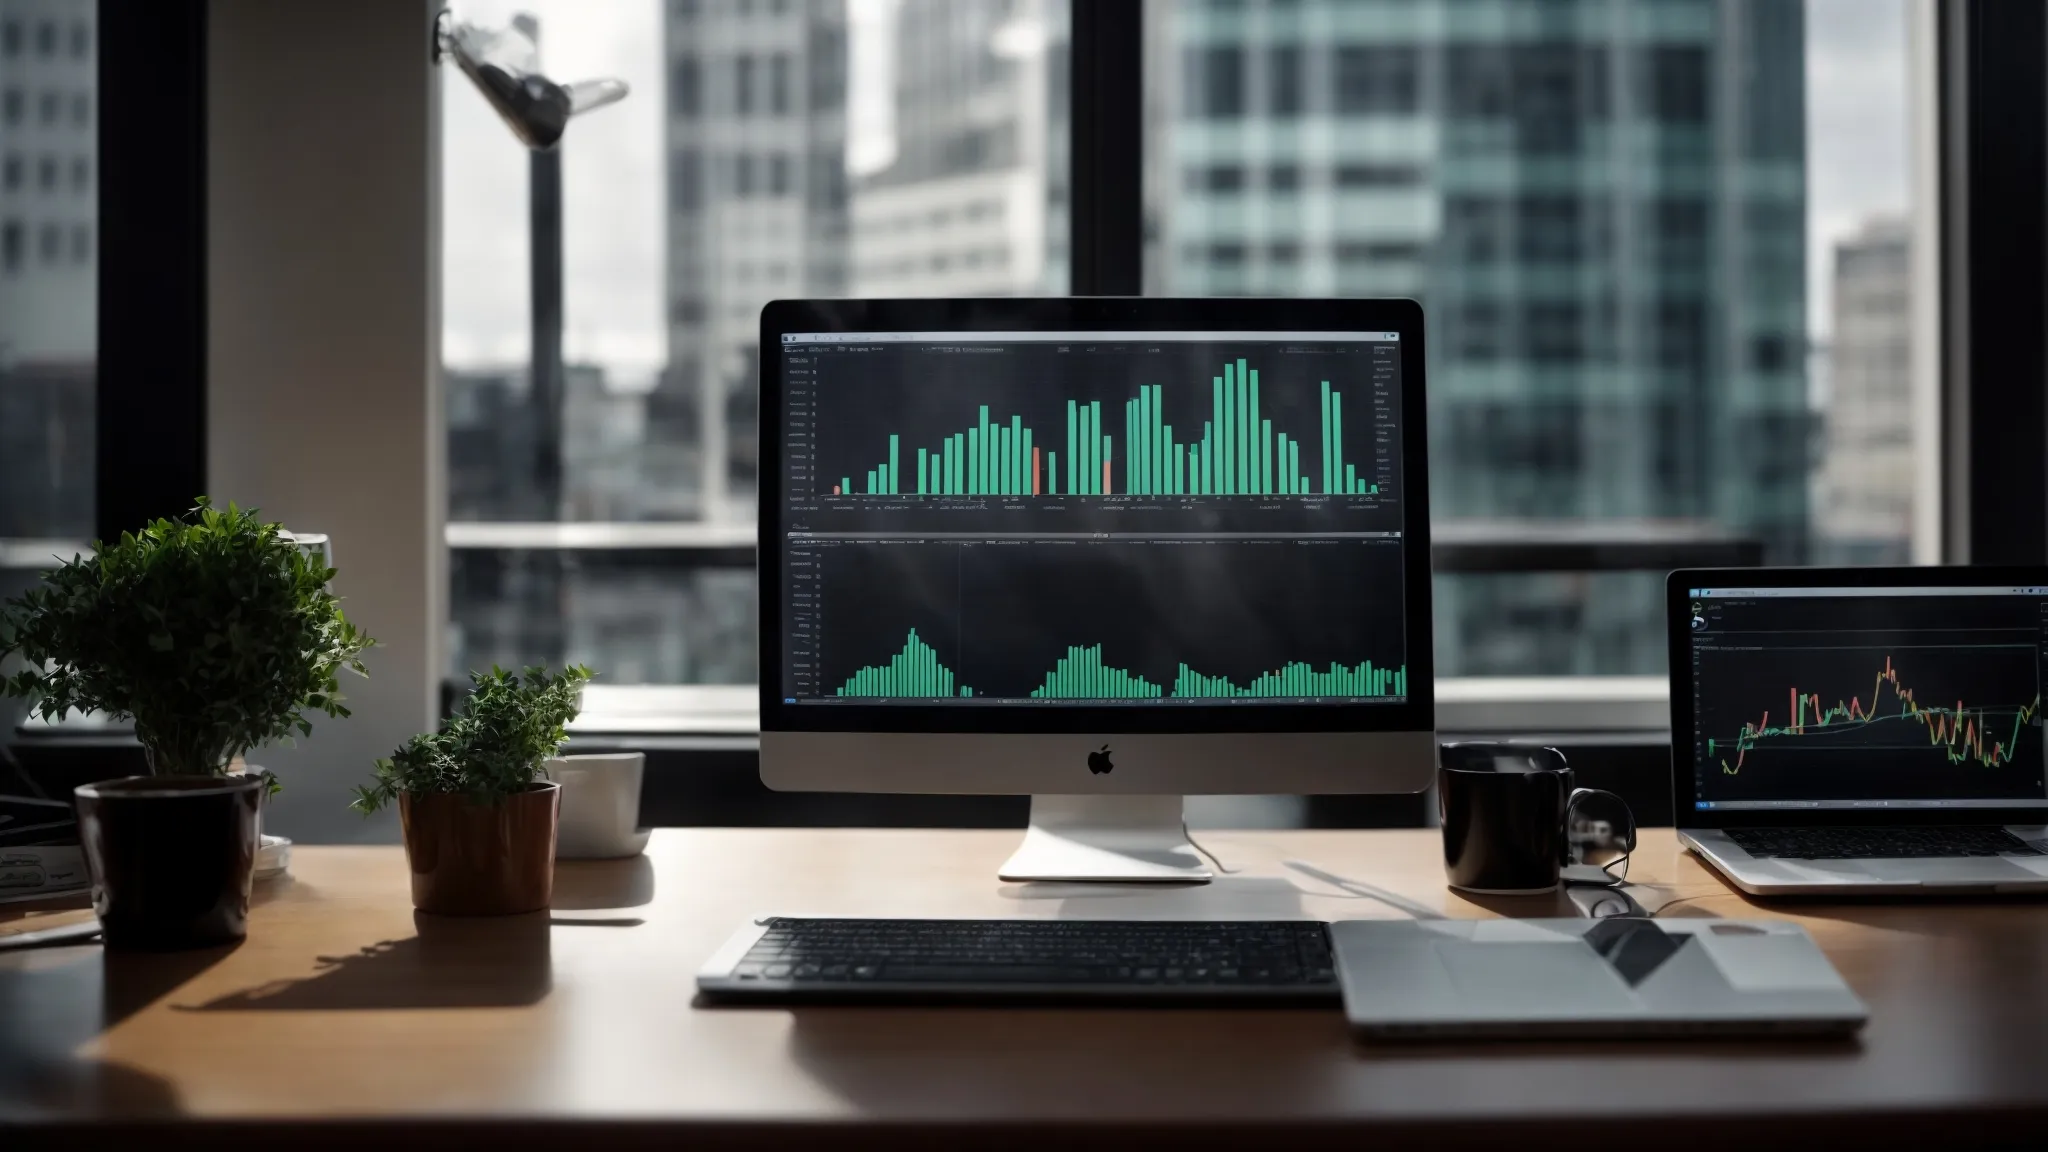 a modern office setup with a laptop displaying graphs and analytical data on seo performance.